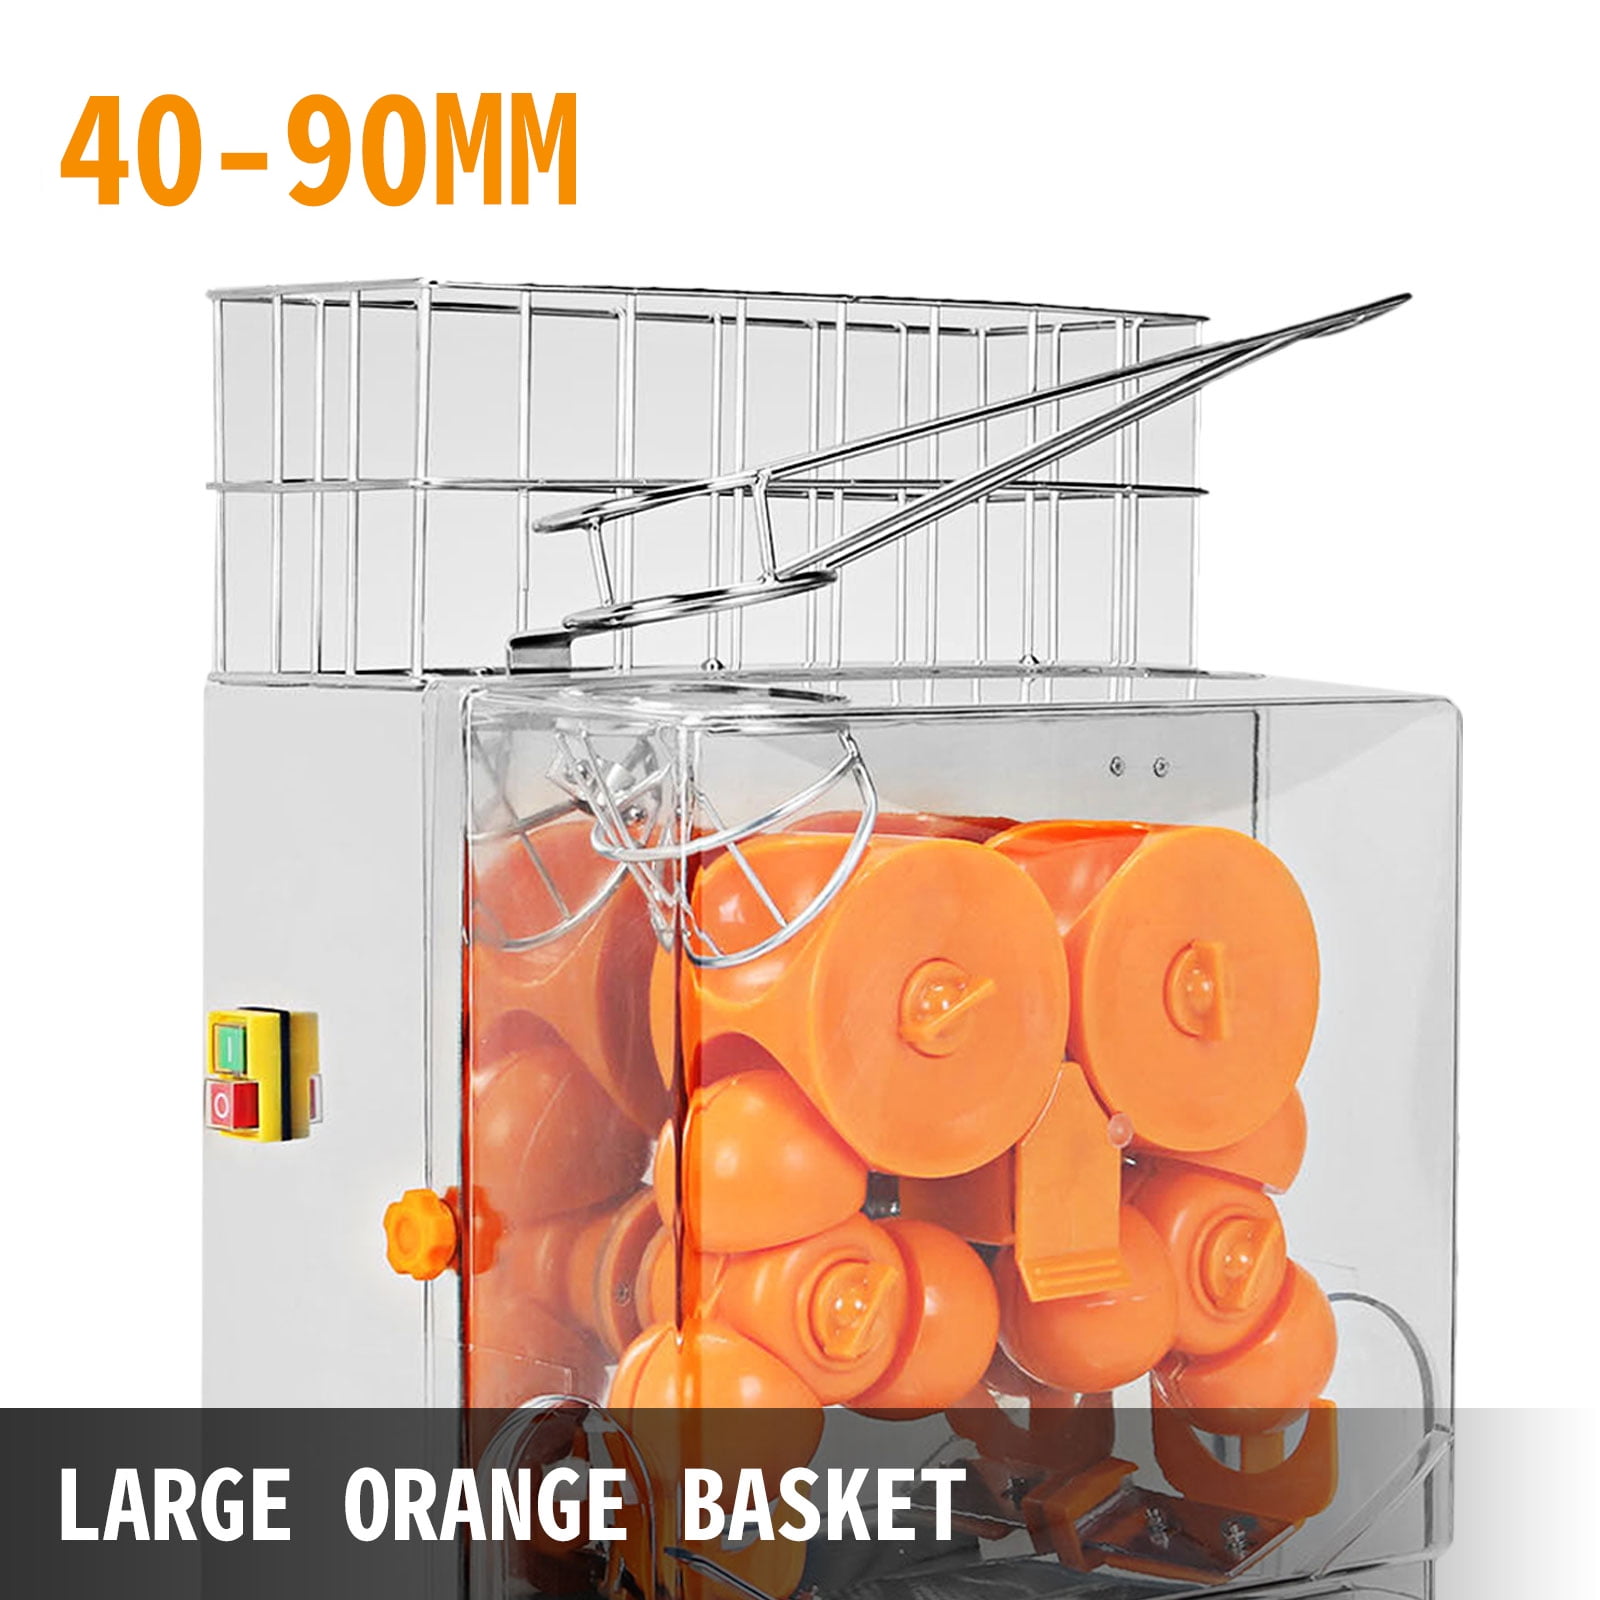 Commercial Orange Juicer Machine, With Pull-Out Filter Box, Electric Citrus  Juice Squeezer - Bed Bath & Beyond - 31420492